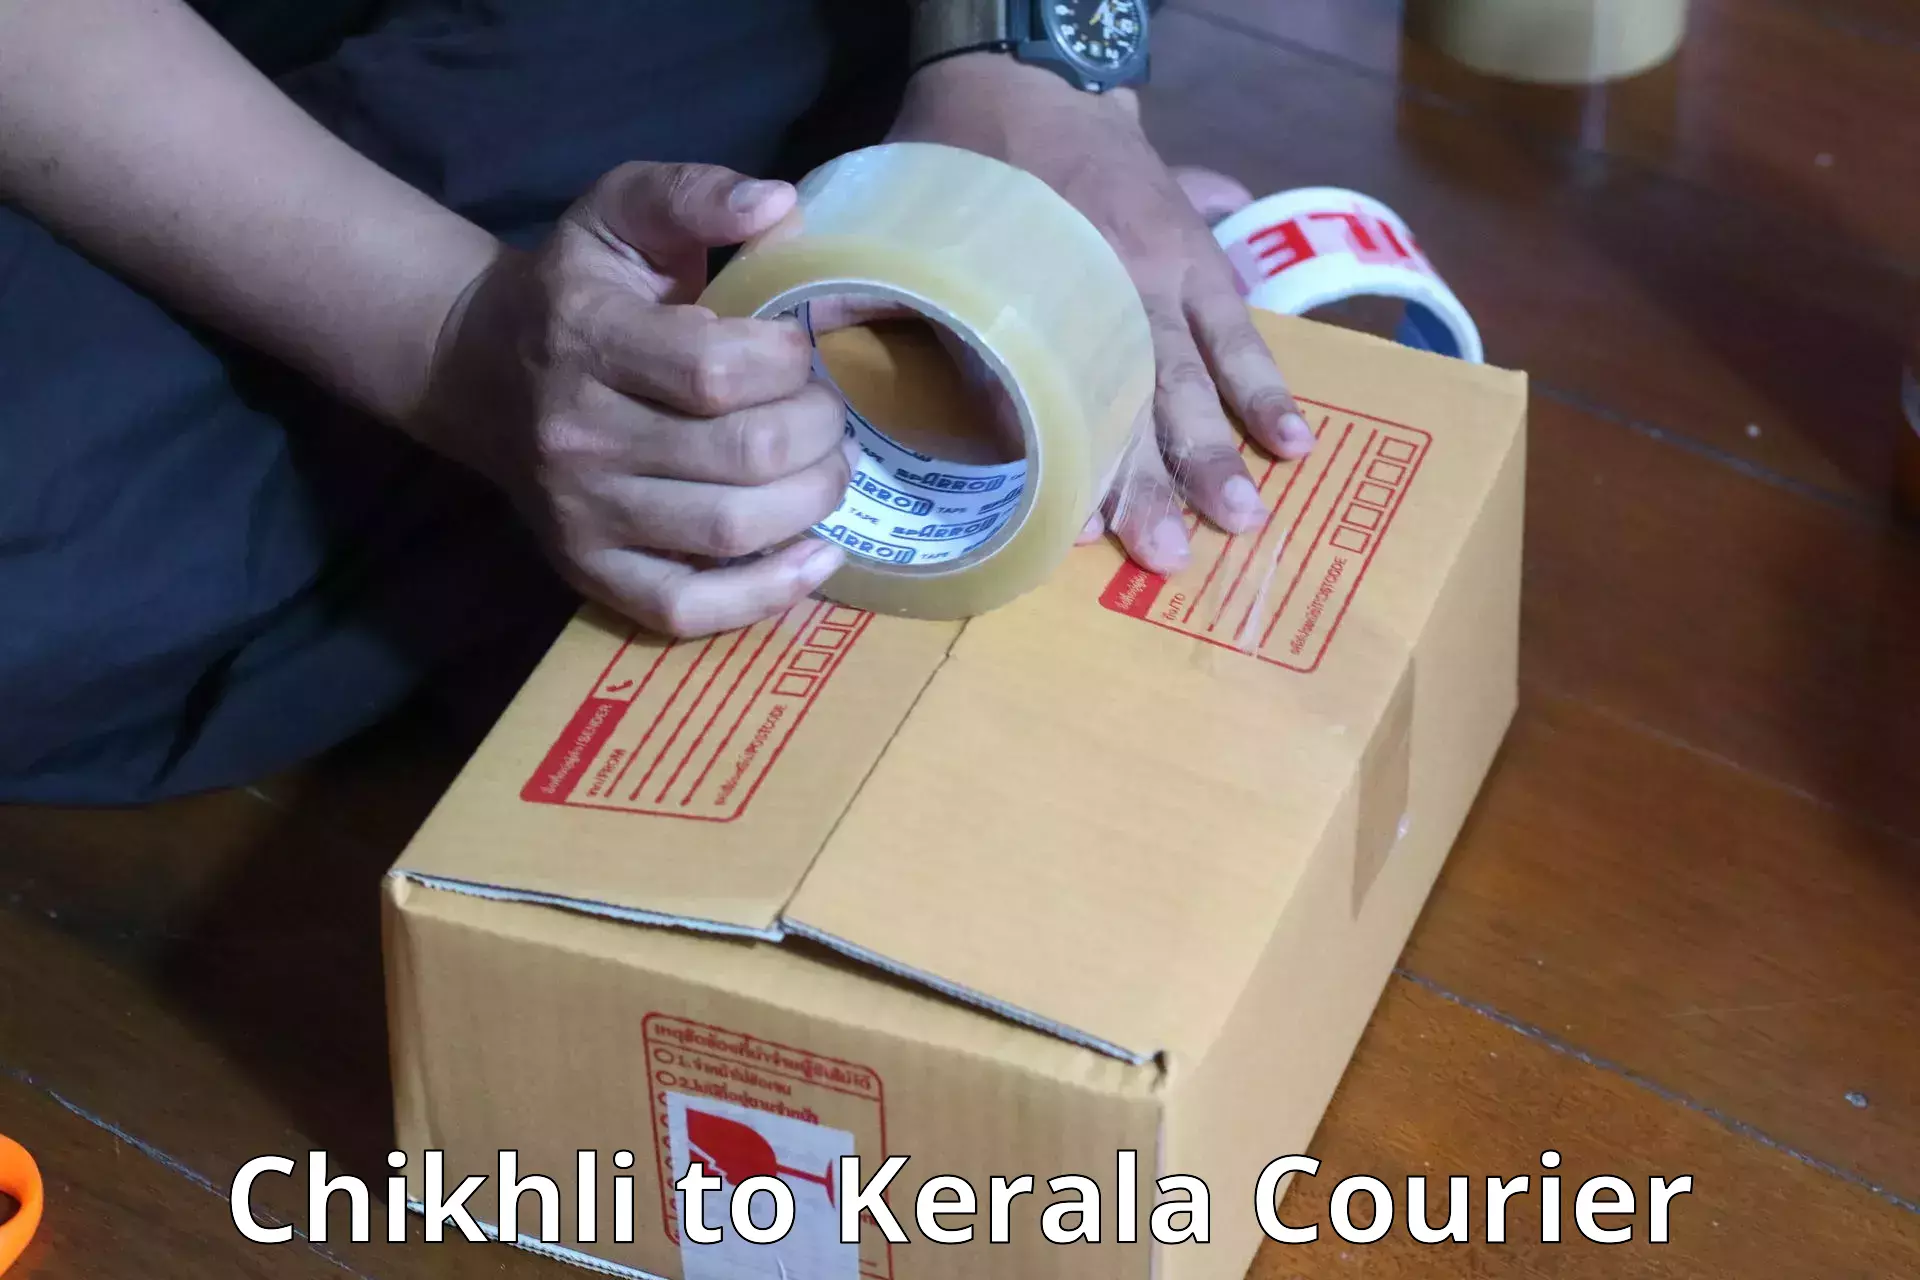 Personal effects shipping in Chikhli to Ernakulam